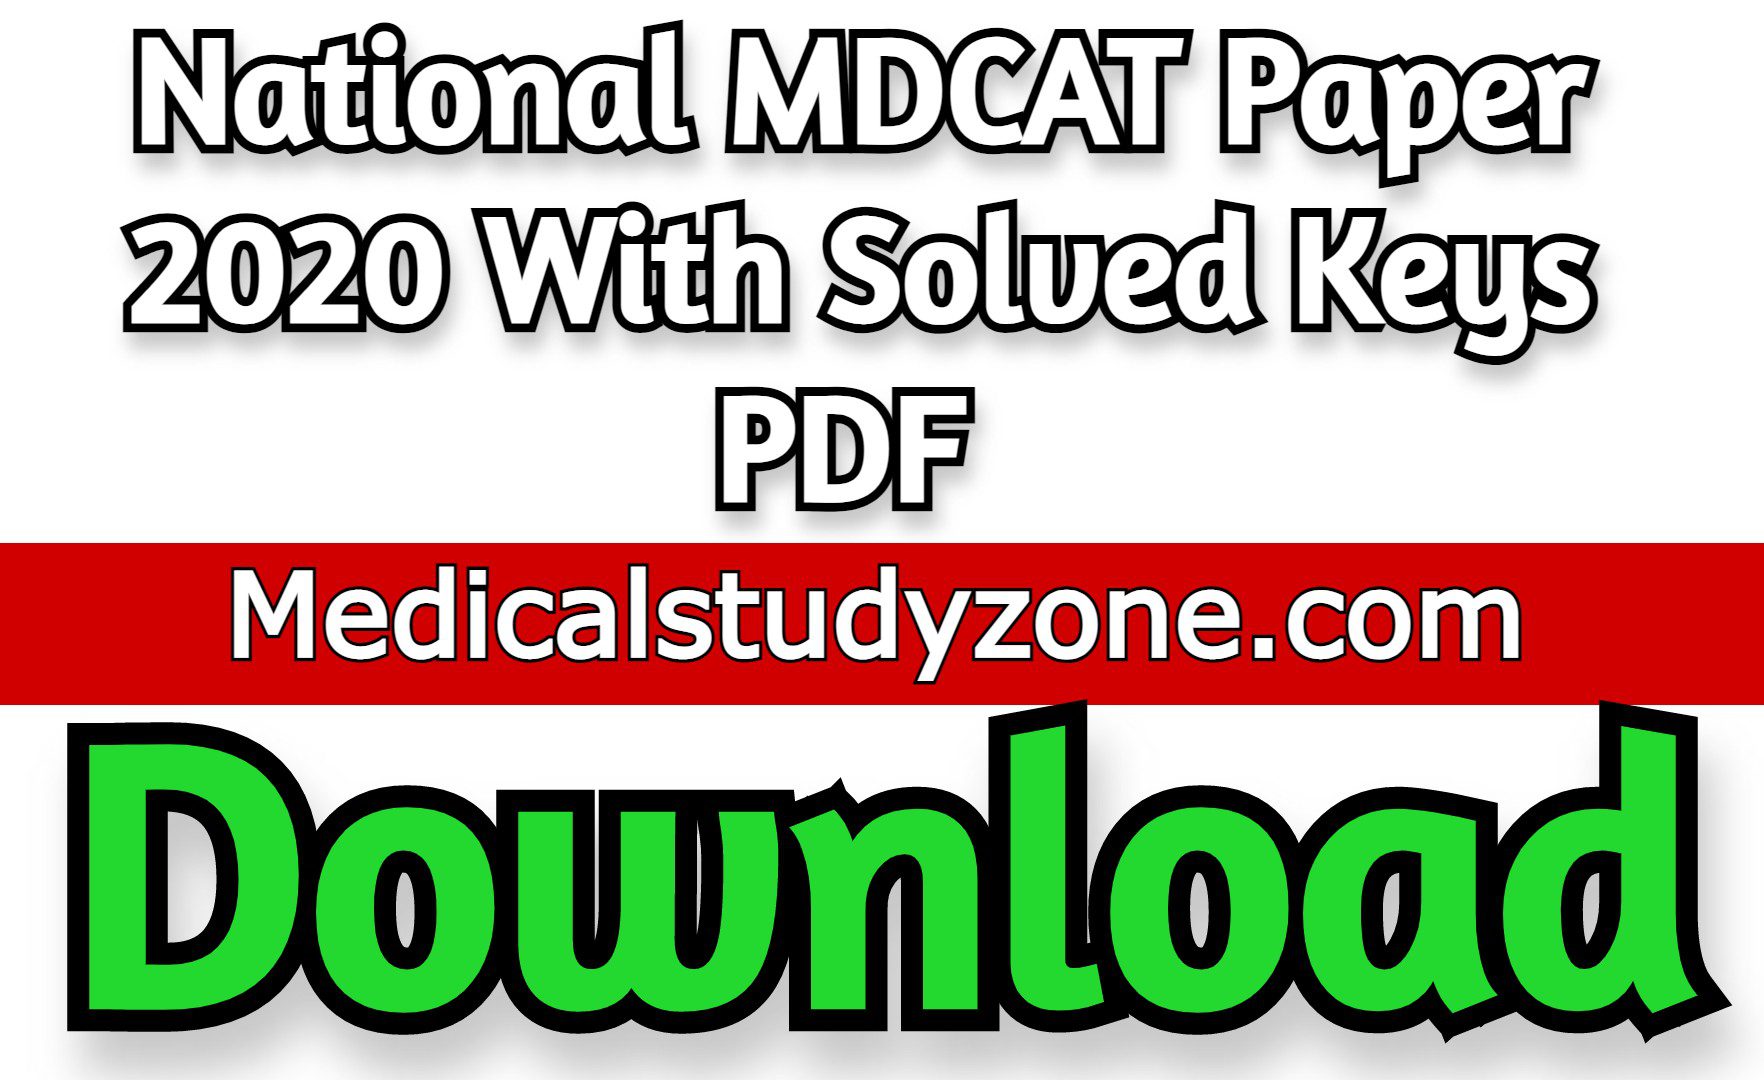 National MDCAT Paper 2020 With Solved Keys PDF Free Download